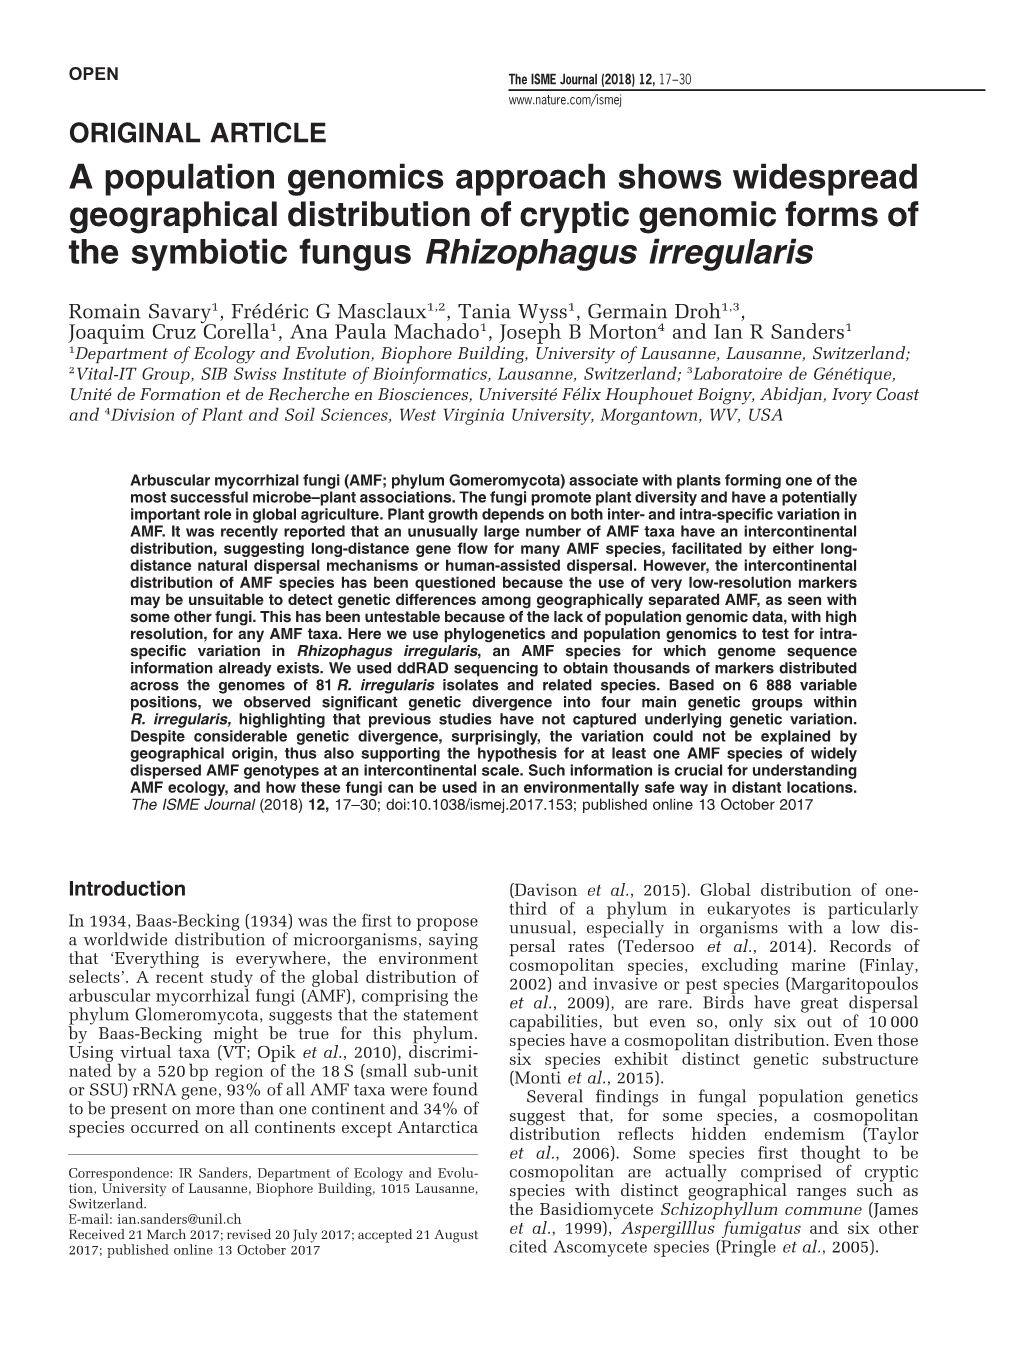 A Population Genomics Approach Shows Widespread Geographical Distribution of Cryptic Genomic Forms of the Symbiotic Fungus Rhizophagus Irregularis